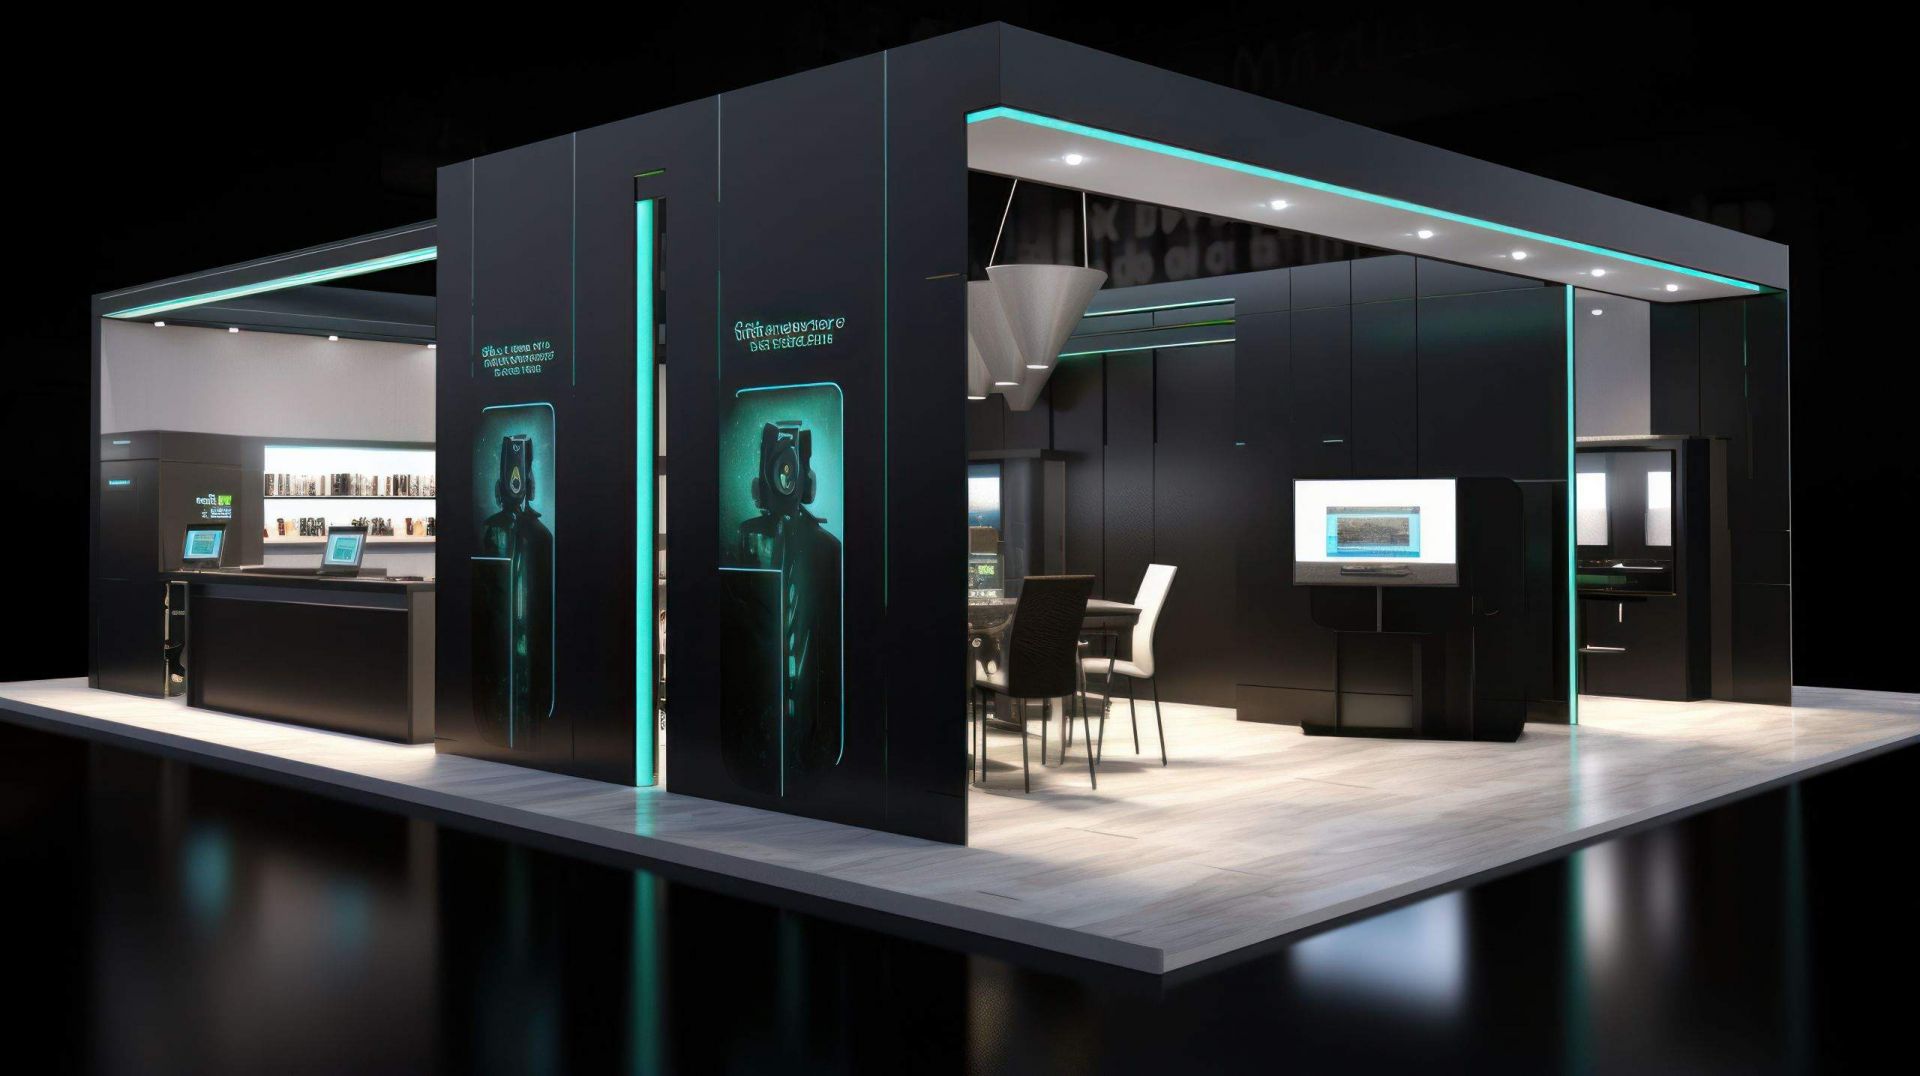 Visualisation vr project, Commercial stand in exhibition hall or large professional salon ready to receive brands and advertisements.